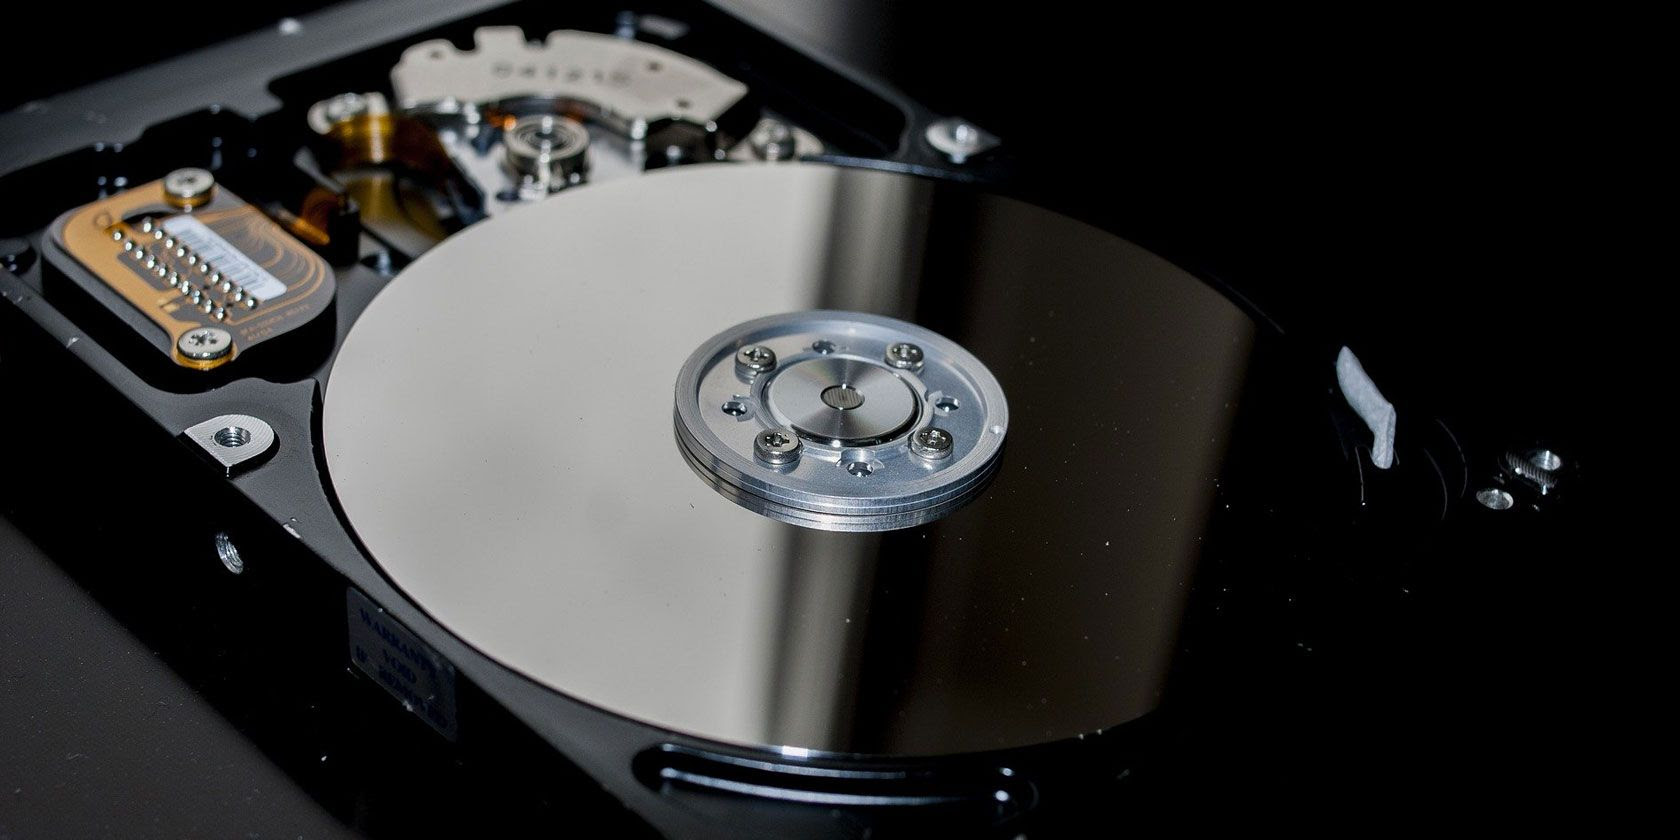 The 8 Most Reliable Hard Drives According to Server Companies